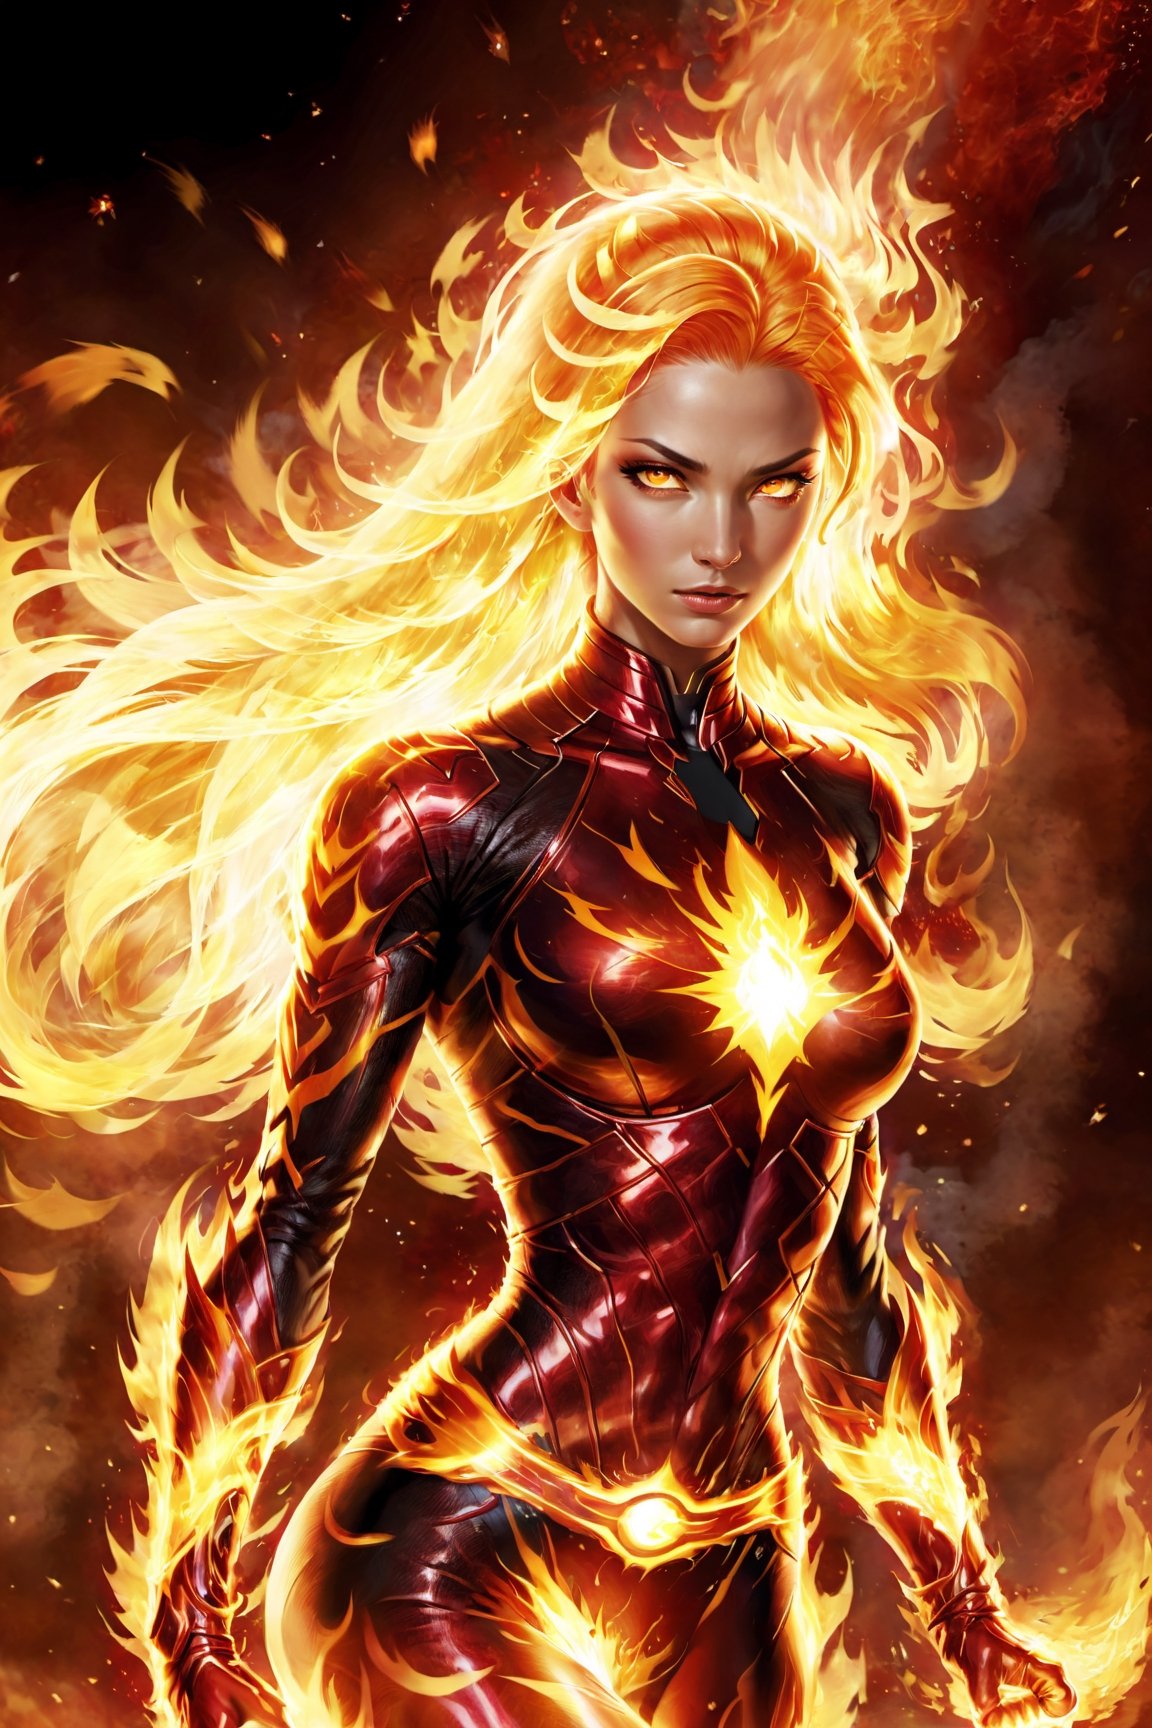 anime:1.9, cartoon:1.9, Imagine a dynamic scene featuring of iconic DC Comics character, enchantress mixed lady_human torch, heroin, superhero, fire deity, muscular, athleticism, combustion, energy, smoke, ashes. Firehair. (fire Eyes:1.6). (incandescent fireball in his hands:1.6). ((concentration of fire in her upright right hand, she is prepared to attack)). ((fire lit in the palms of his hands)). Visualize him engulfed in flames, sexy pose, very big breast, swinging, radiating with fiery intensity. ((fire-colored suit with red details)). ((His body burns with great intensity, emitting light and heat, burning in flames)). Craft a prompt for a super detailed, 16k Ultra HDR image capturing the essence of Human Torch's blazing presence – perfect face, flames, and dynamic pose. (brightness, vibe, vitality, energy, halo, halo, aura:1.5), (arms wrapped in flames, fire). flashes of fire surround his body. Choose a background that complements his character, creating a cinematic masterpiece with high realism and top-notch image quality, fire element:1.5,3d_toon_xl:0.2, xl-shanbailing-1003fire-000010:0.6, demonictech:0.1, MagmaTech:0.1human on fire:1.2, feh:0.4, firepunch:1.3, zeldaALBW:0.1, makioze:0.4, fire_lit_DC:0.5, DonMF1re:0.5, FireAI:0.6, Cursed energy:0.5, XieS:0.3, r1ge - AnimeRage:1.3, :JuggerCineXL2:0.6,add_detail:0.6,3d toon style